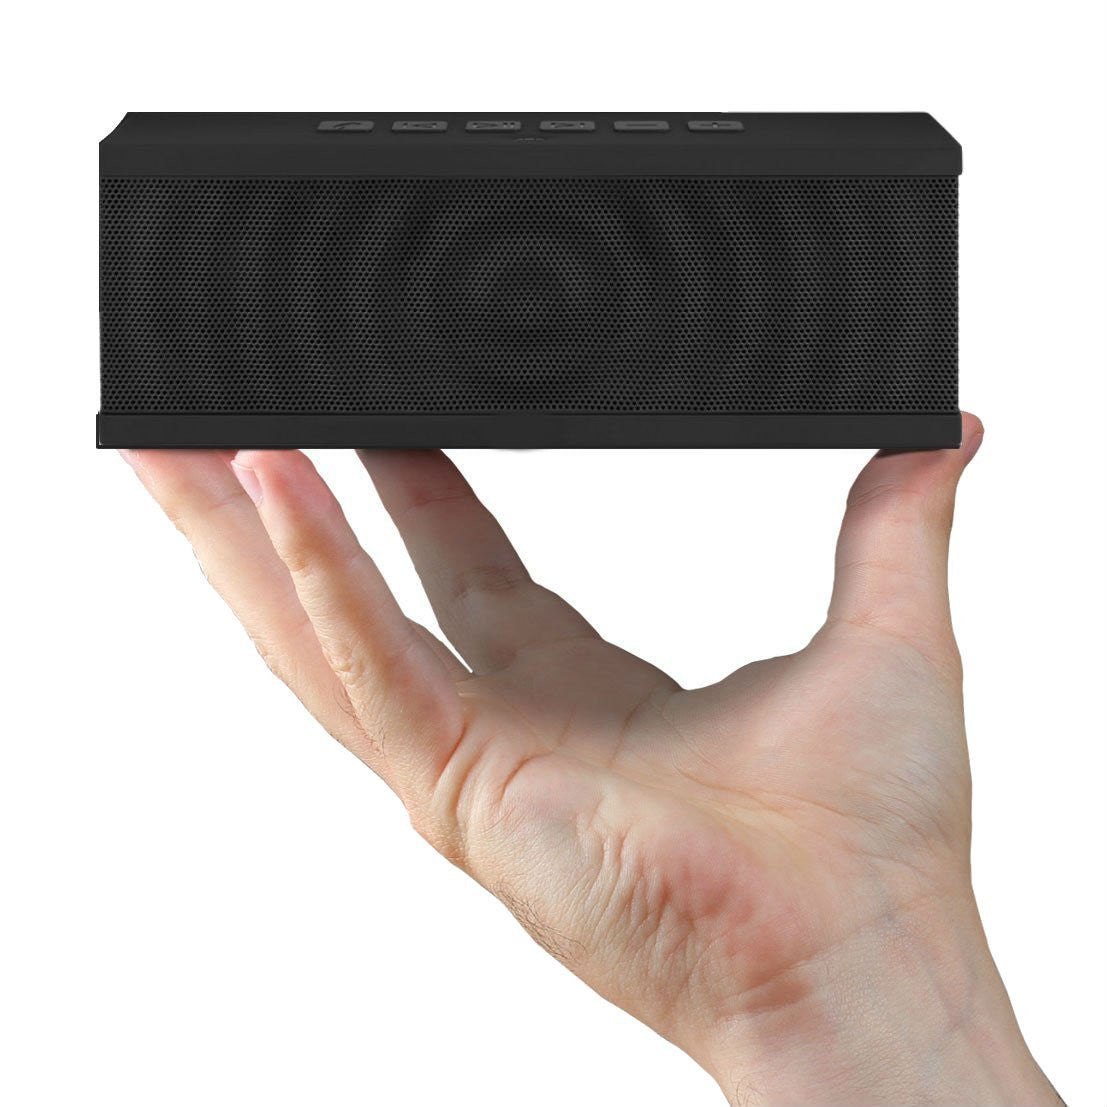 Tmvel Masti Ultra Portable Wireless Bluetooth Speaker with Built-In Speakerphone and 10 Hour Battery - Popularelectronics.com